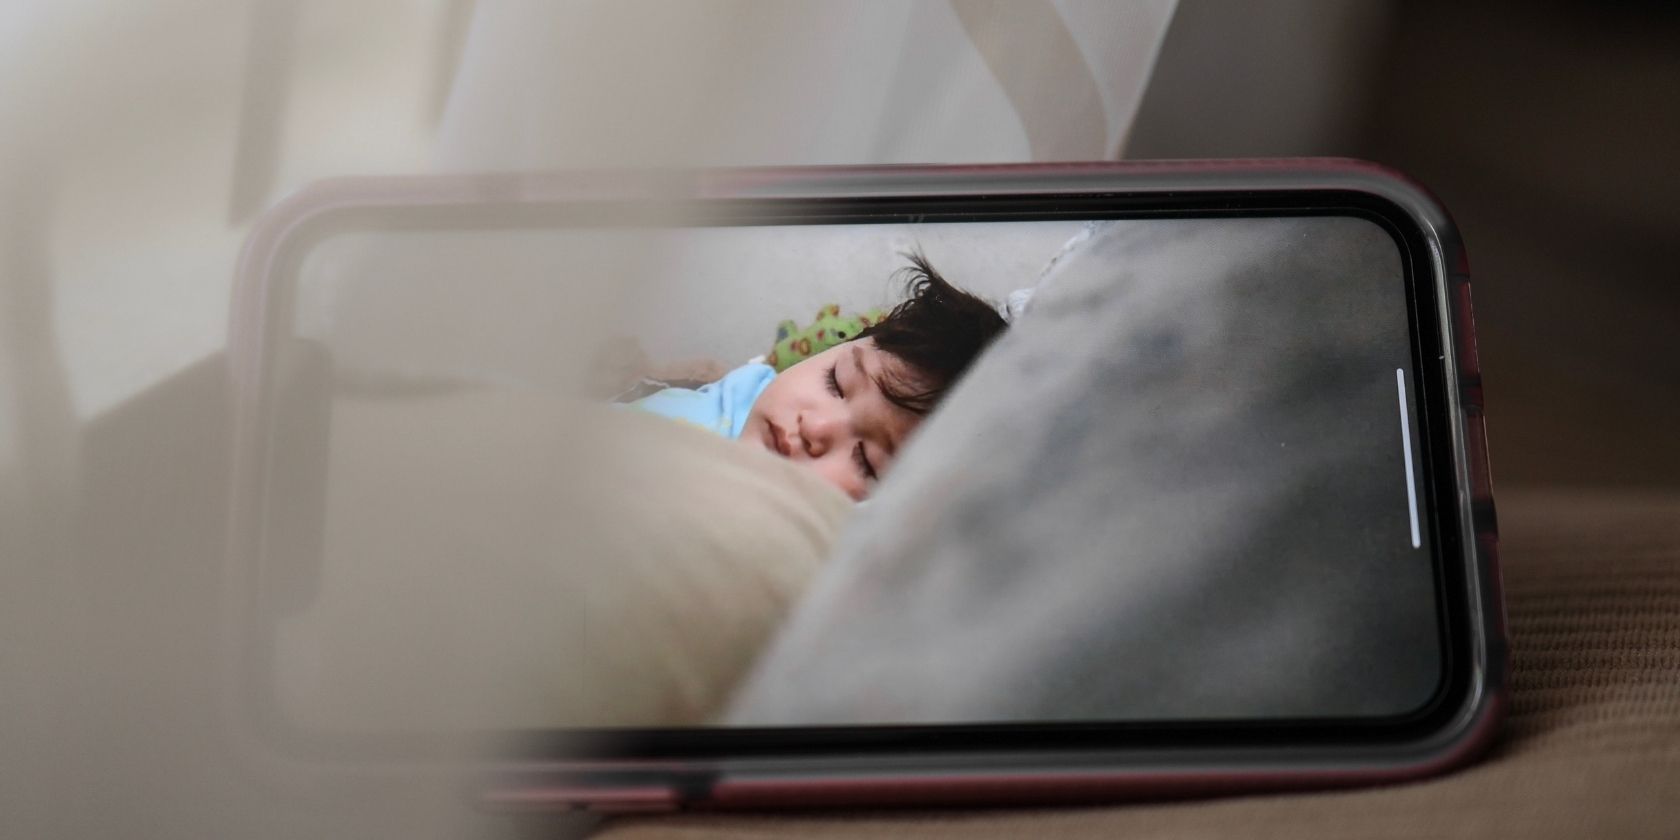 Screen of mobile phone with sleeping baby